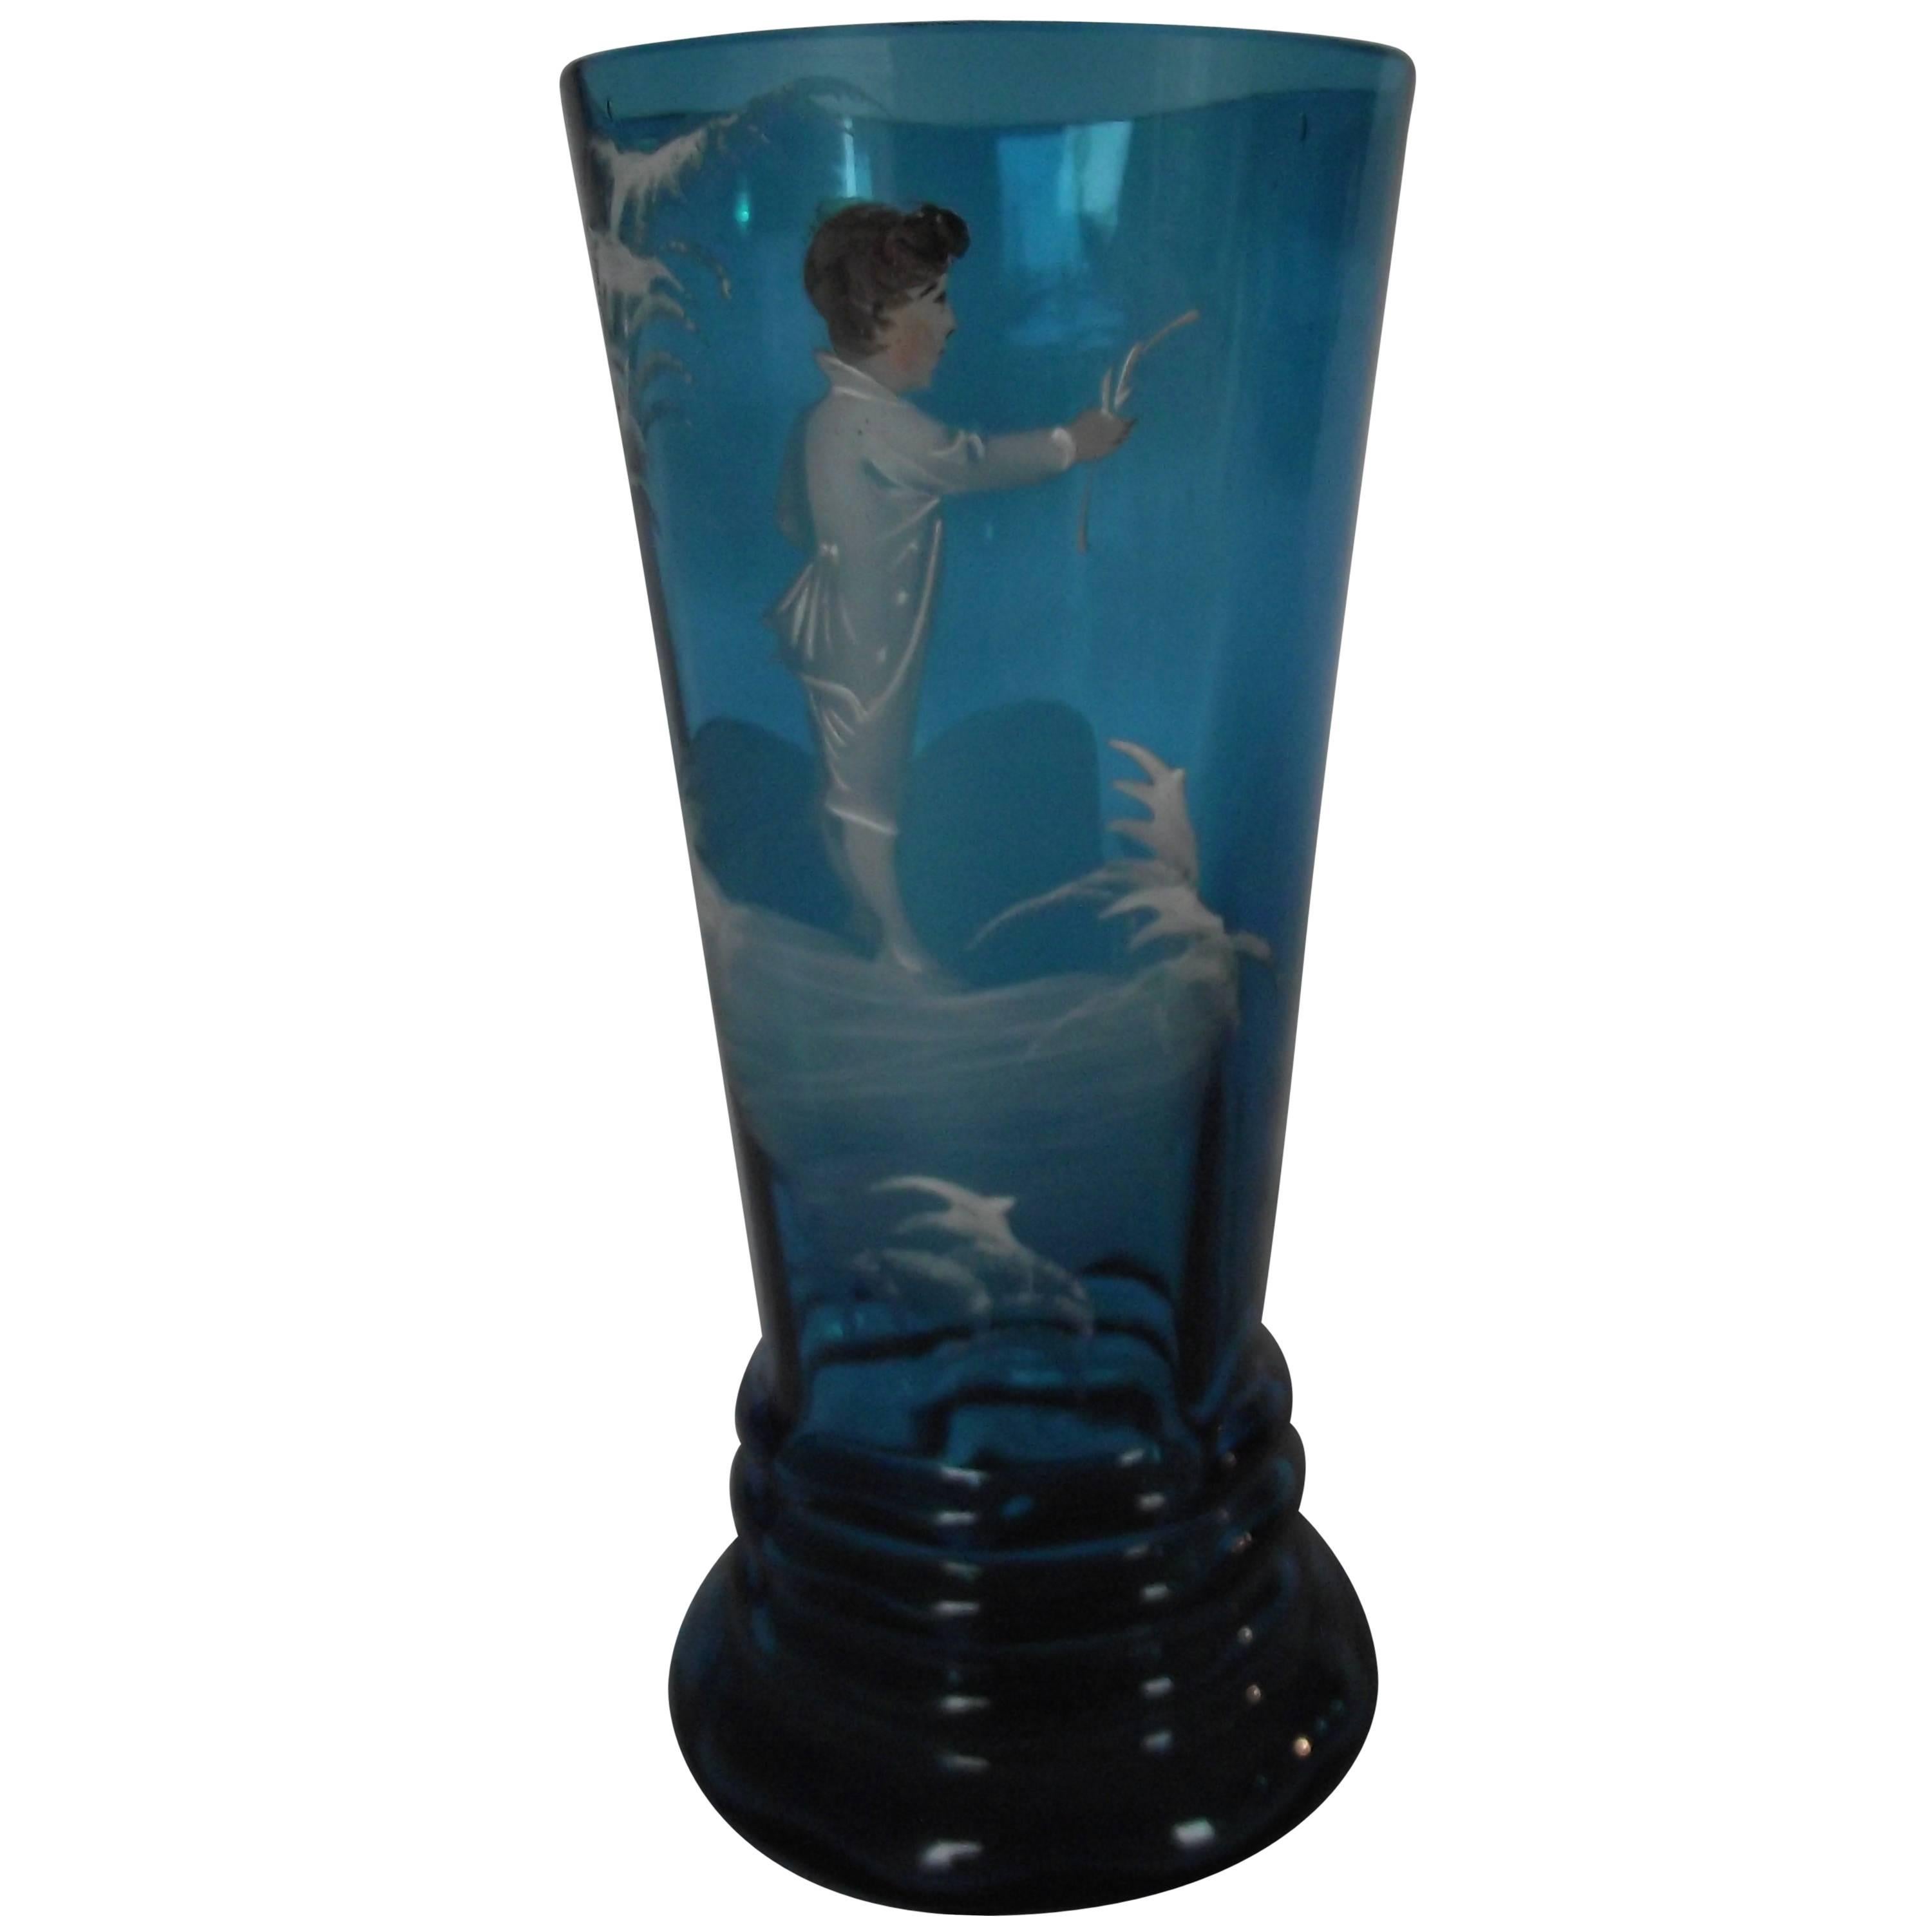 Mary Gregory Vase, Blue Glass Hand-Painted Enamel Scene Featuring Young Boy For Sale